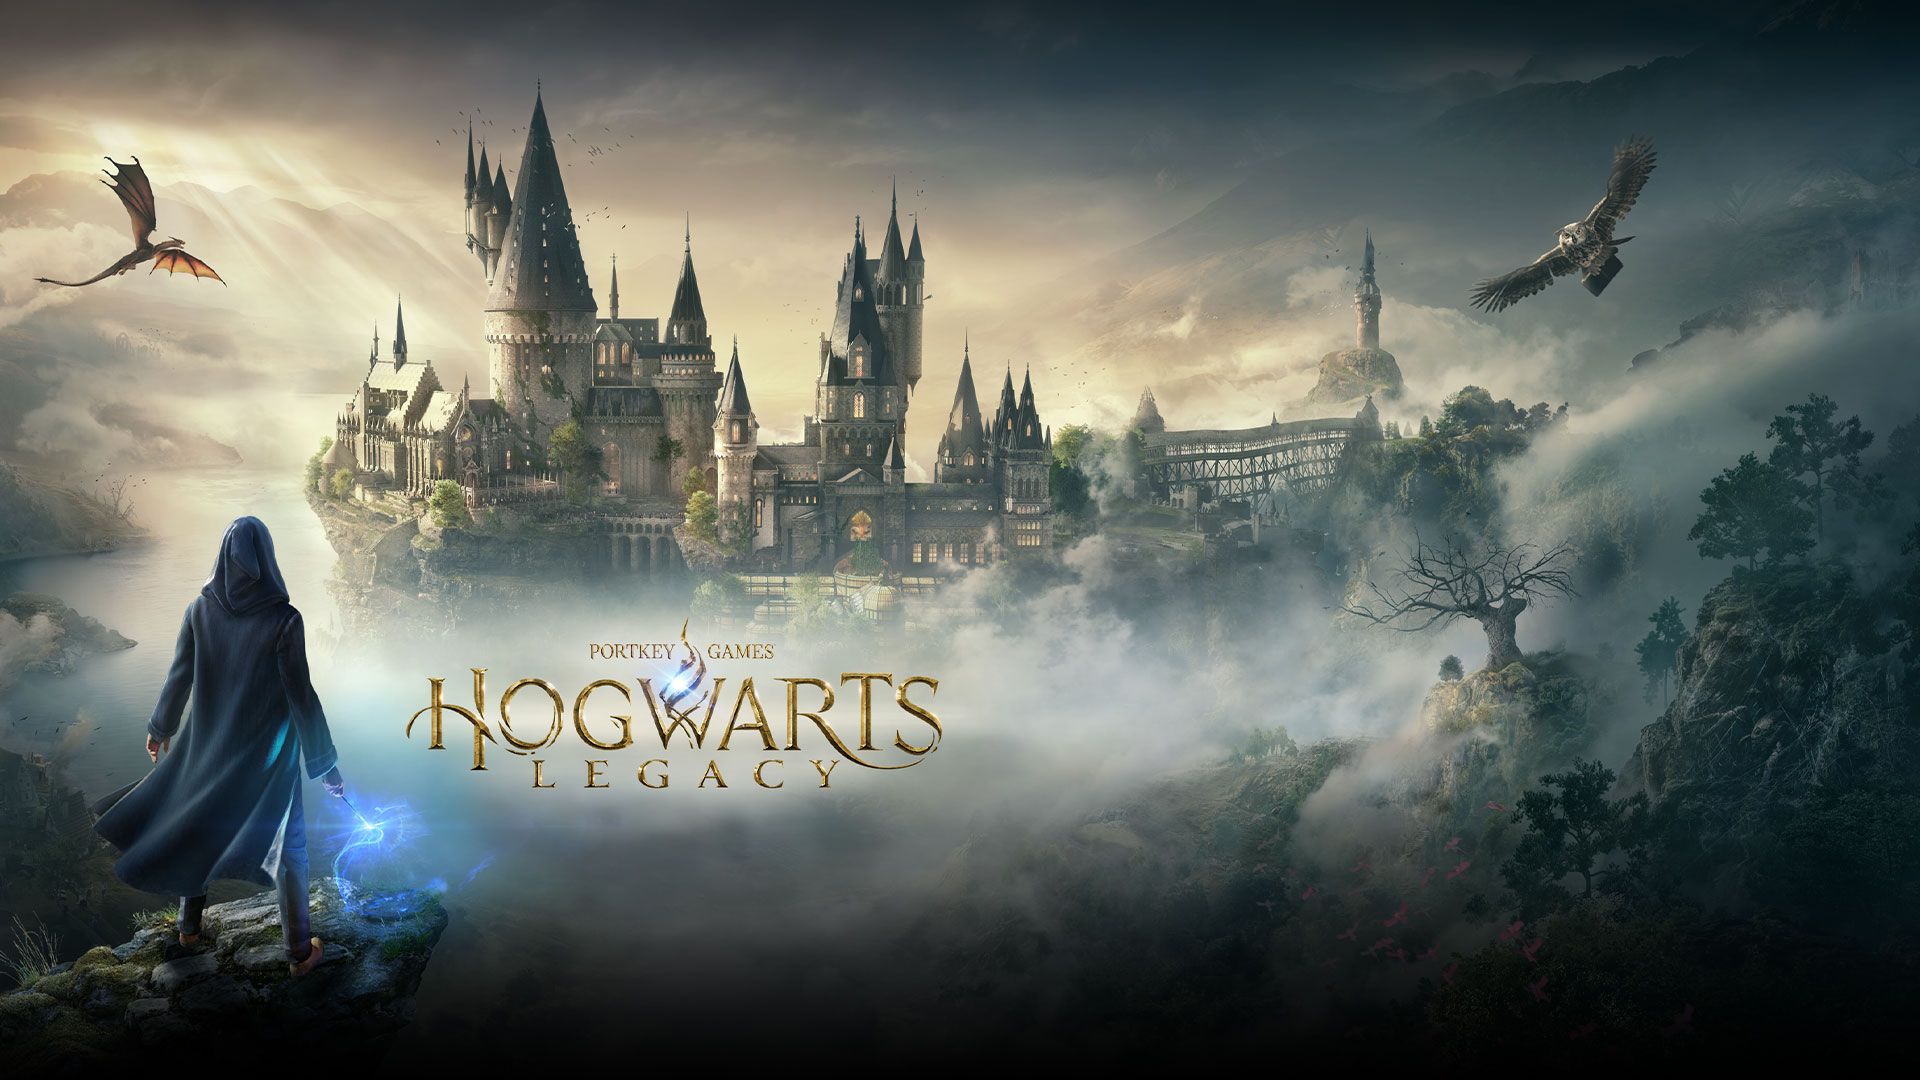 Hogwarts Legacy Is Biggest Single-Player Game Launch in Twitch History